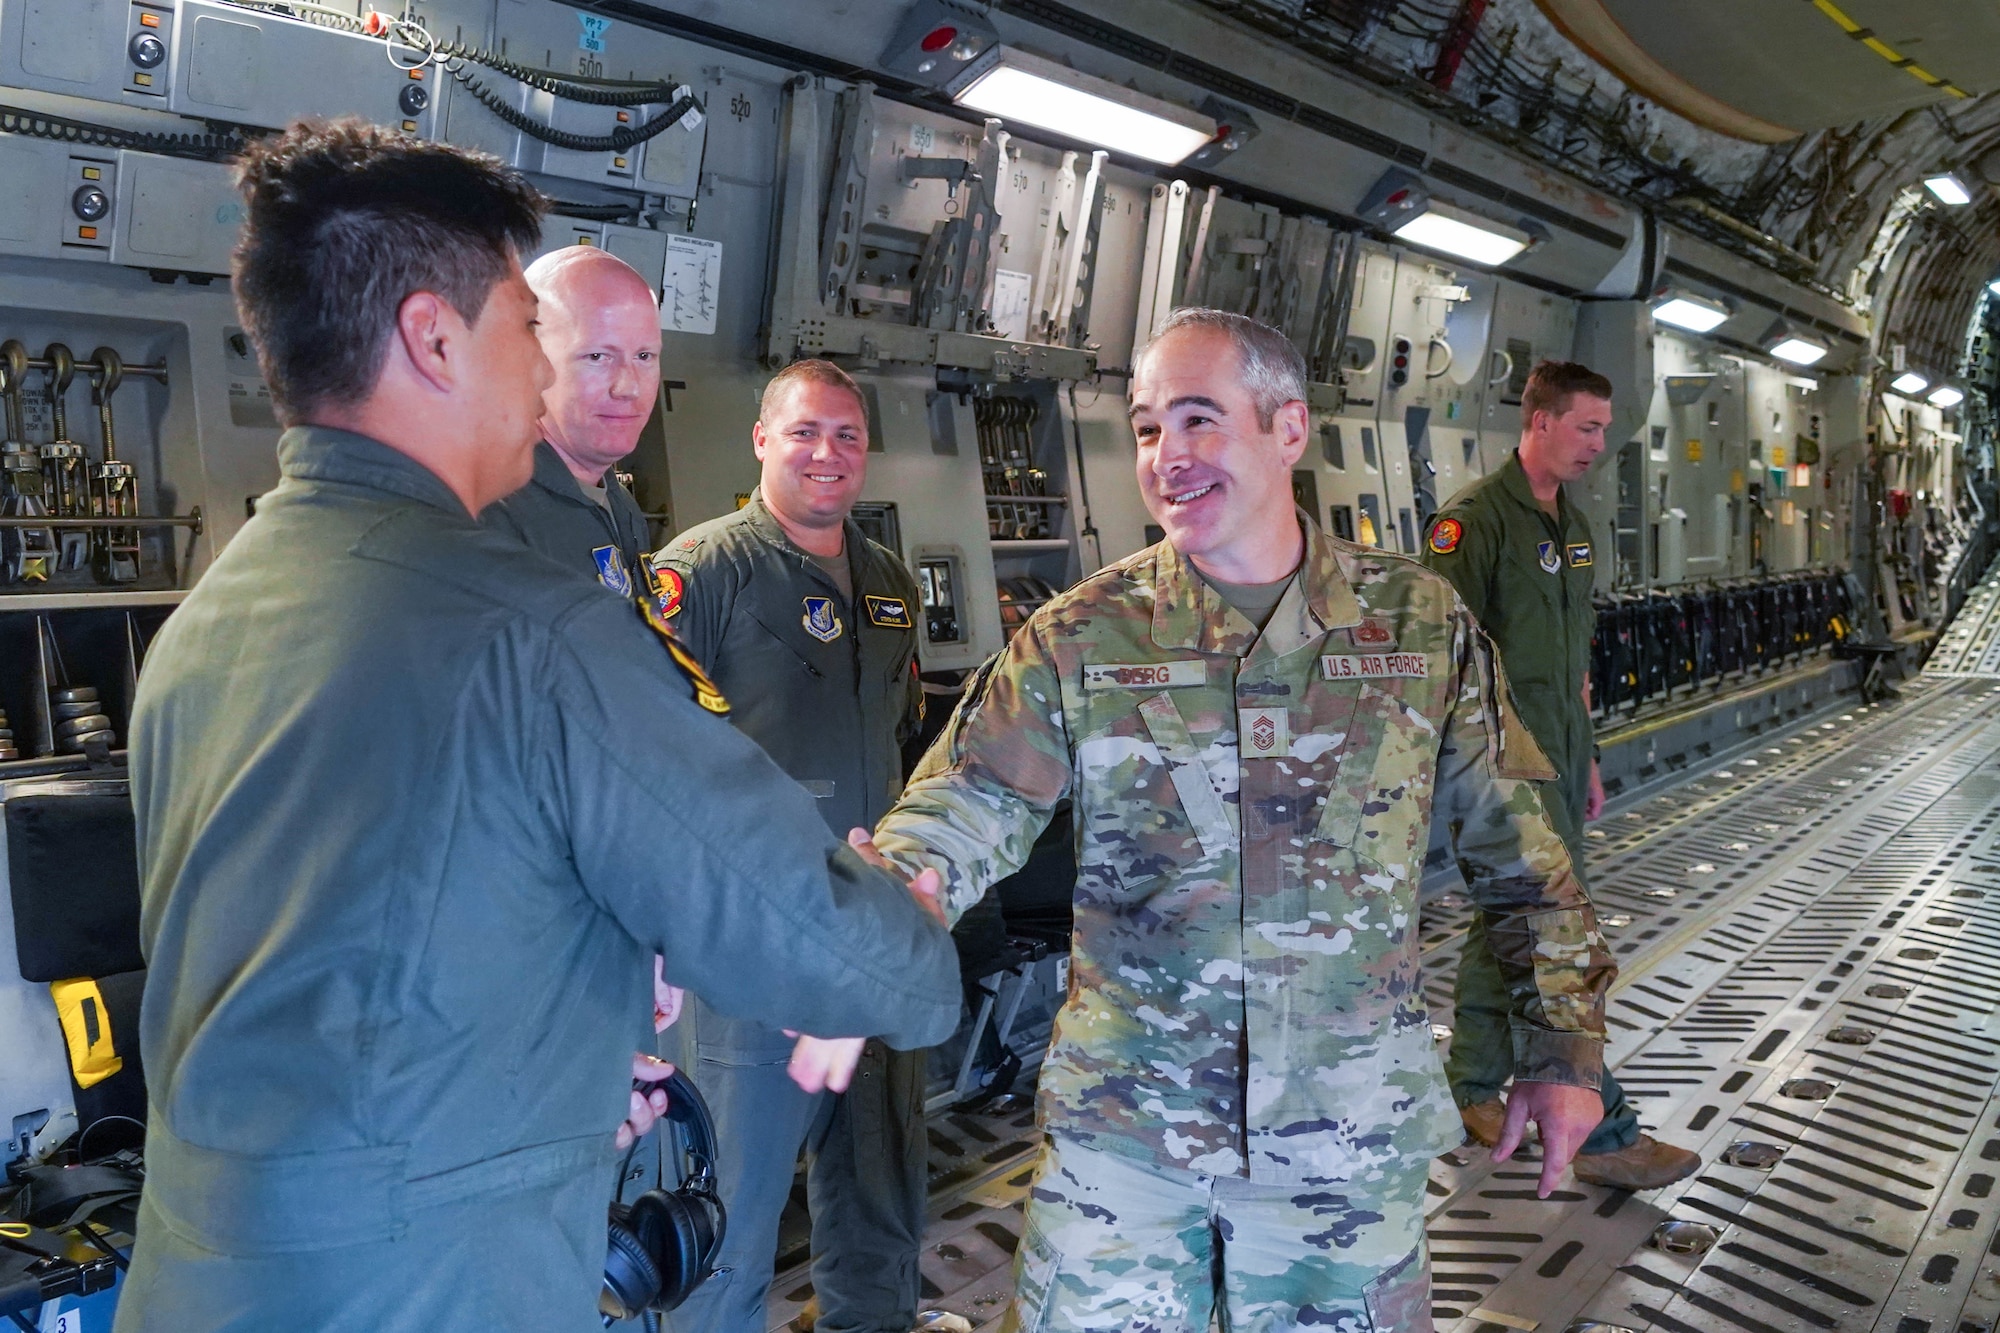 U.S. Air Force Chief Master Sgt. Kristopher Berg, 11th Air Force Command Chief, meets with Airmen assigned to the 15th Wing during a visit to Joint Base Pearl Harbor-Hickam, Hawaii, July 20, 2021. Berg visited several squadrons around the 15th Wing to gain an in-depth exposure to their unique mission and how the wing contributes to the Indo-Pacific region’s security and stability. (U.S Air Force photo by Airman 1st Class Makensie Cooper)